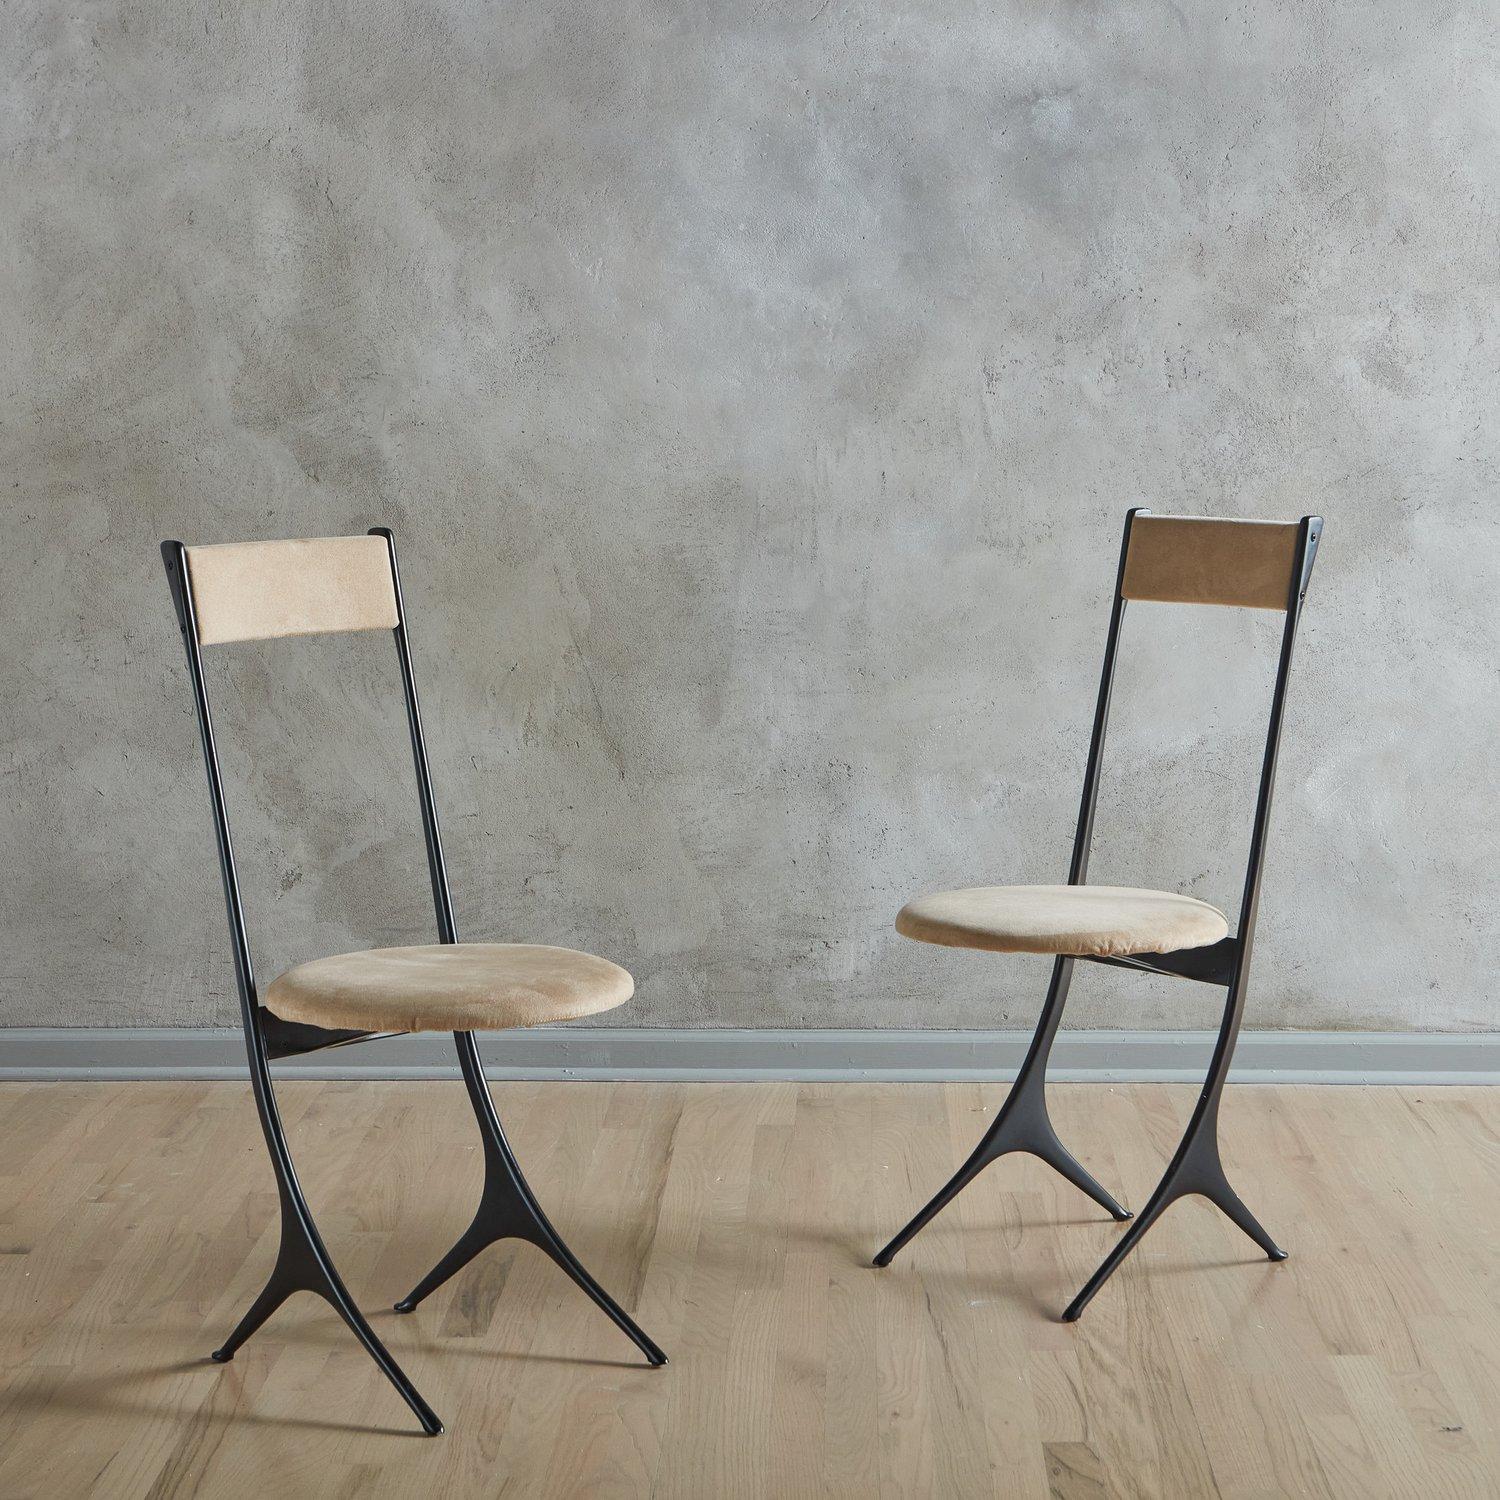 A pair of Italian post modern dining chairs produced by Zanotta in the 1980s. These chairs feature sculptural black aluminum frames with circular seats and rectangular seat backs, which retain their original taupe vegan suede upholstery. Marked